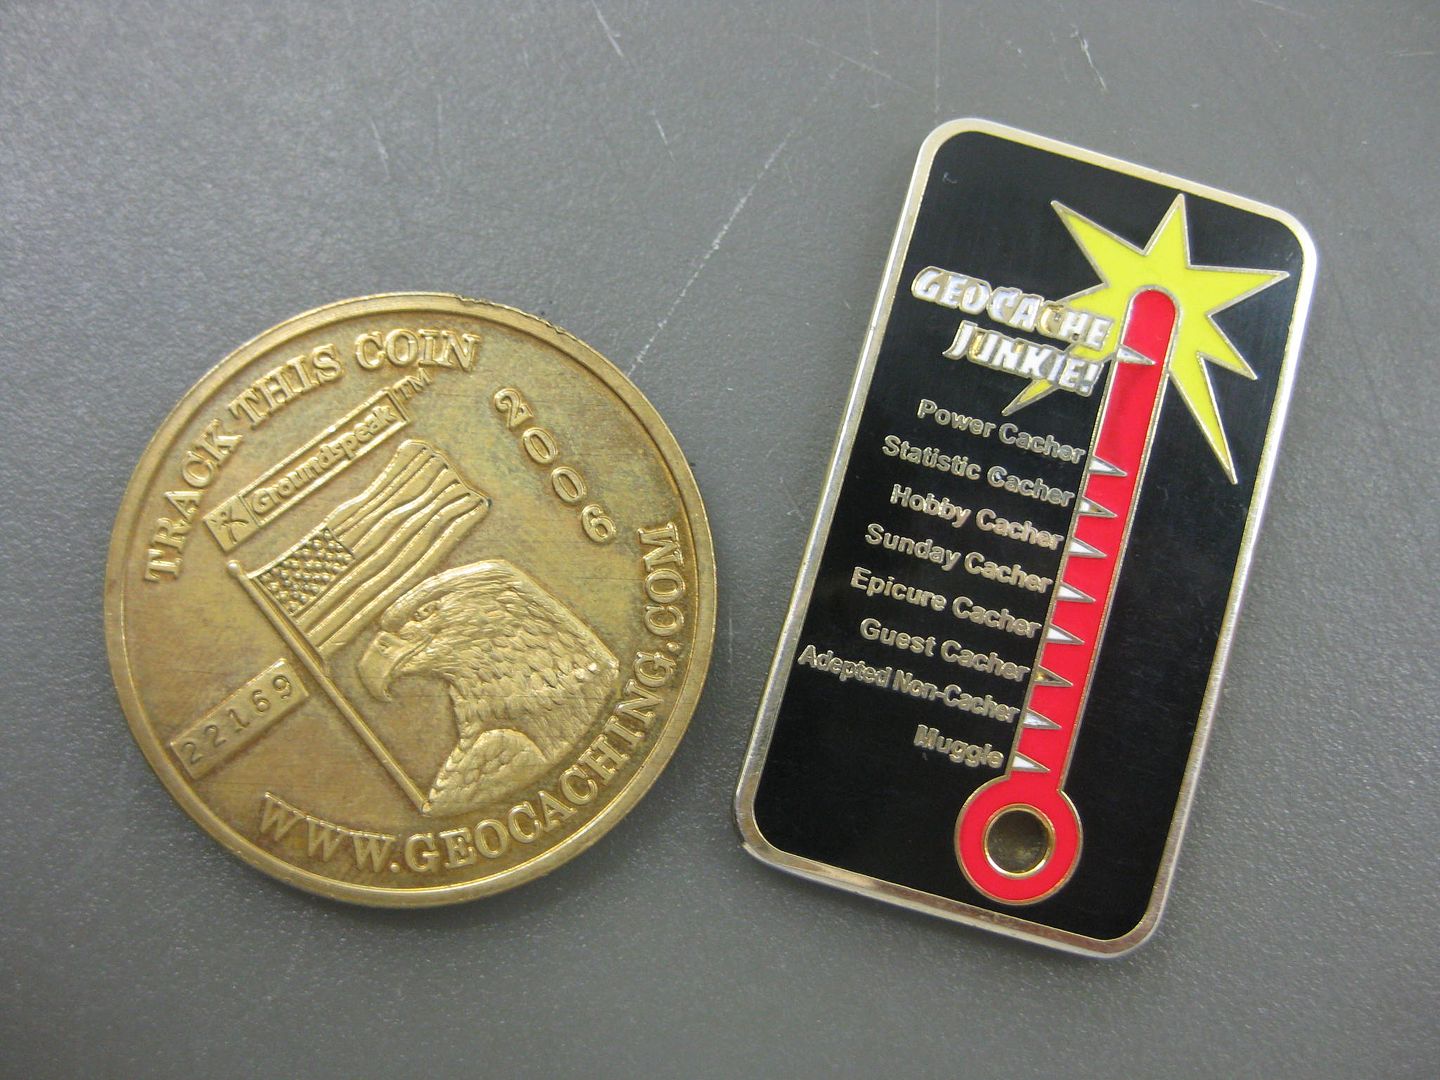 2009102511Geocachingcoins.jpg picture by Pedro48